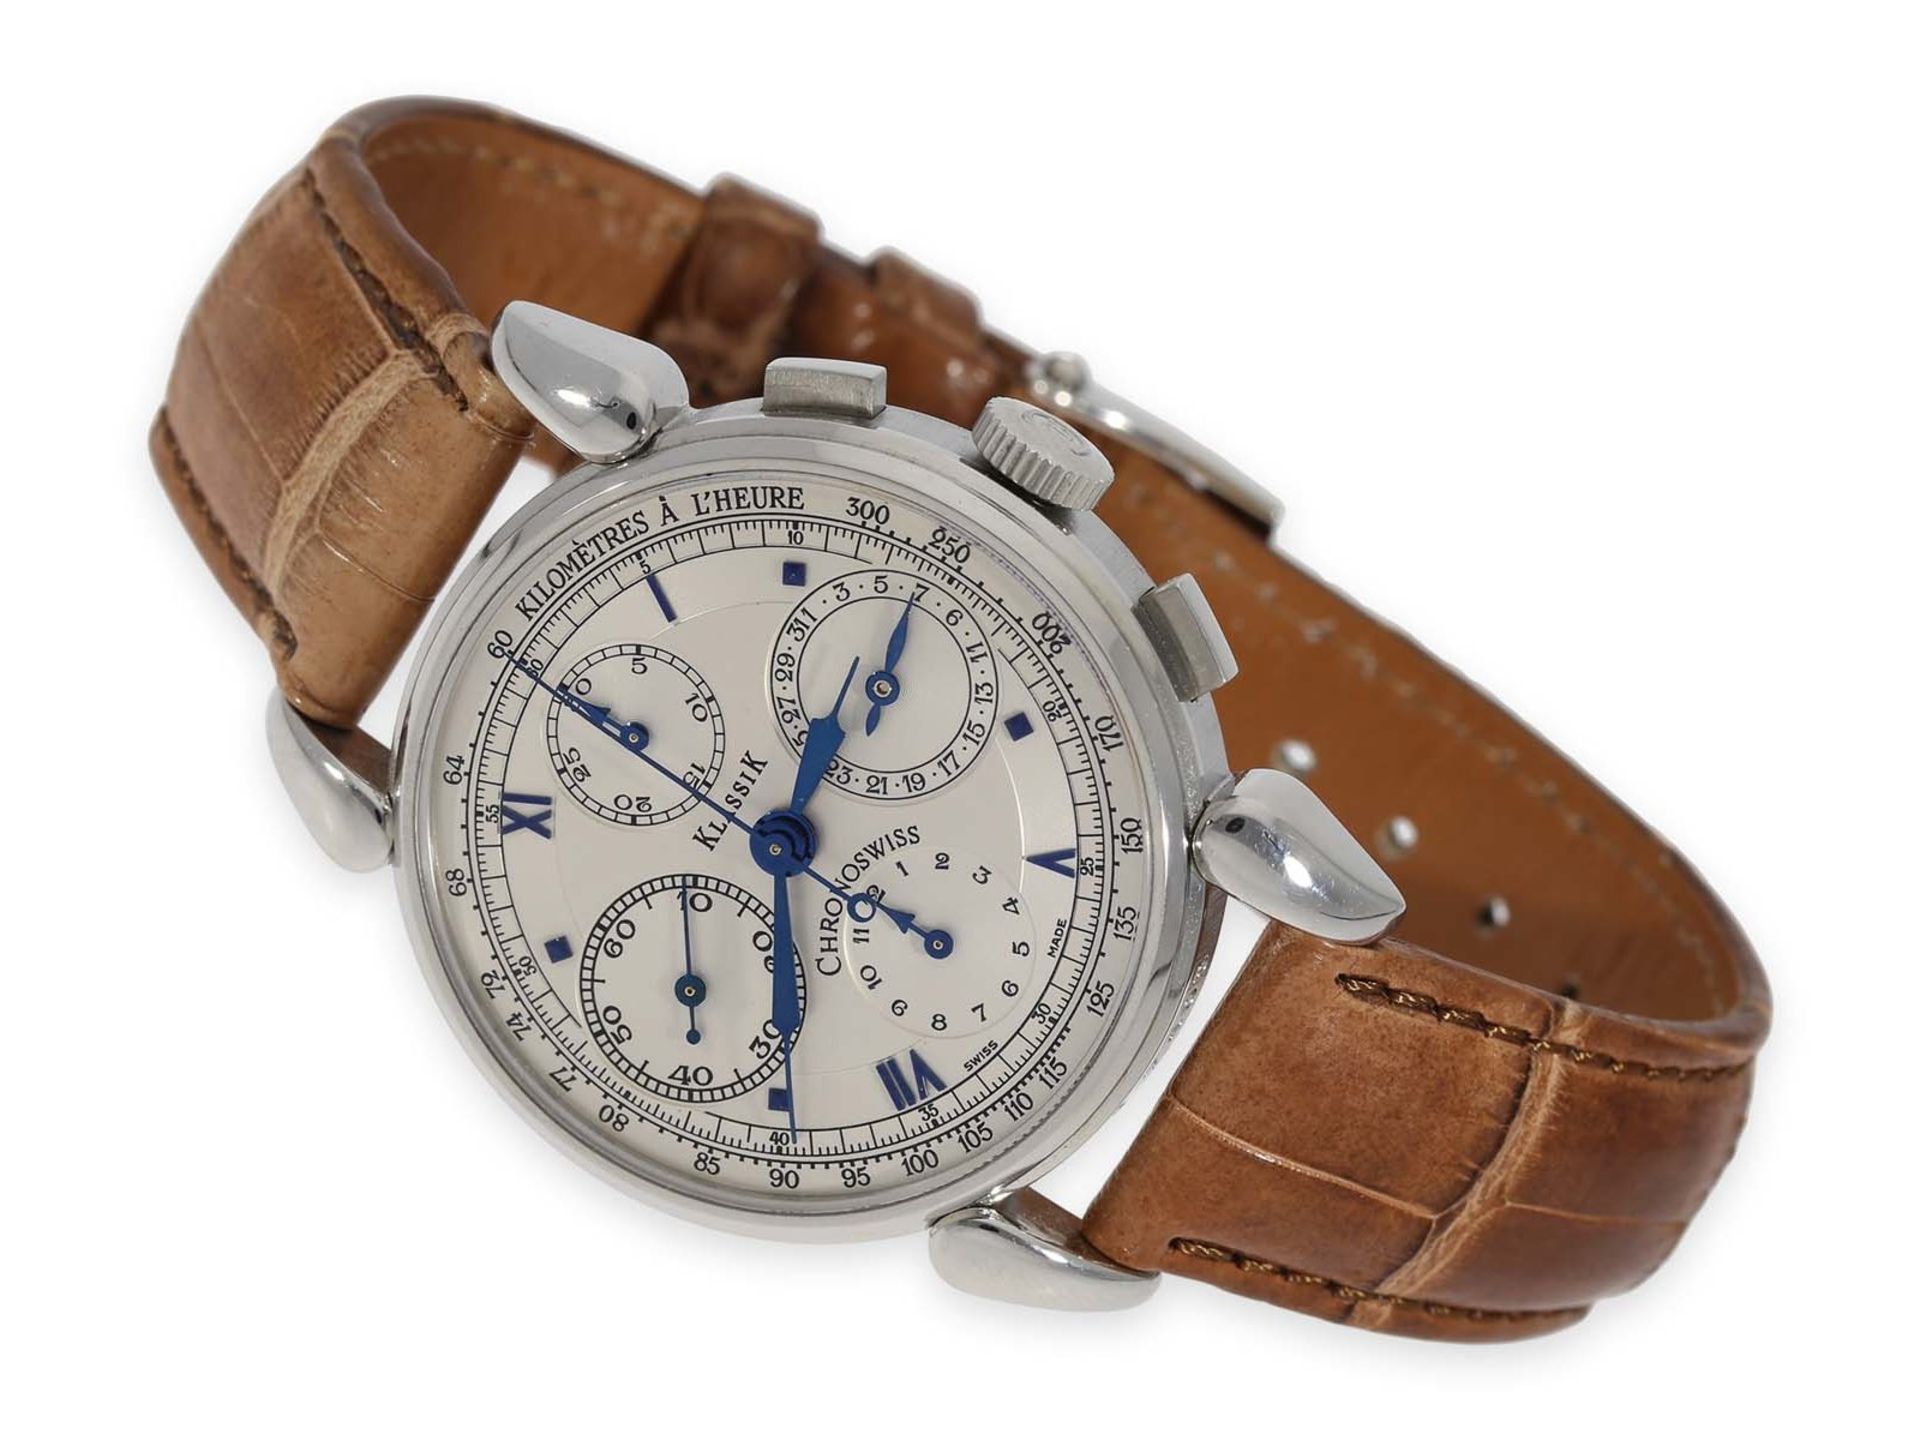 Wristwatch: like new, highly attractive Chronoswiss Chronograph Ref. CH7403 with original box and